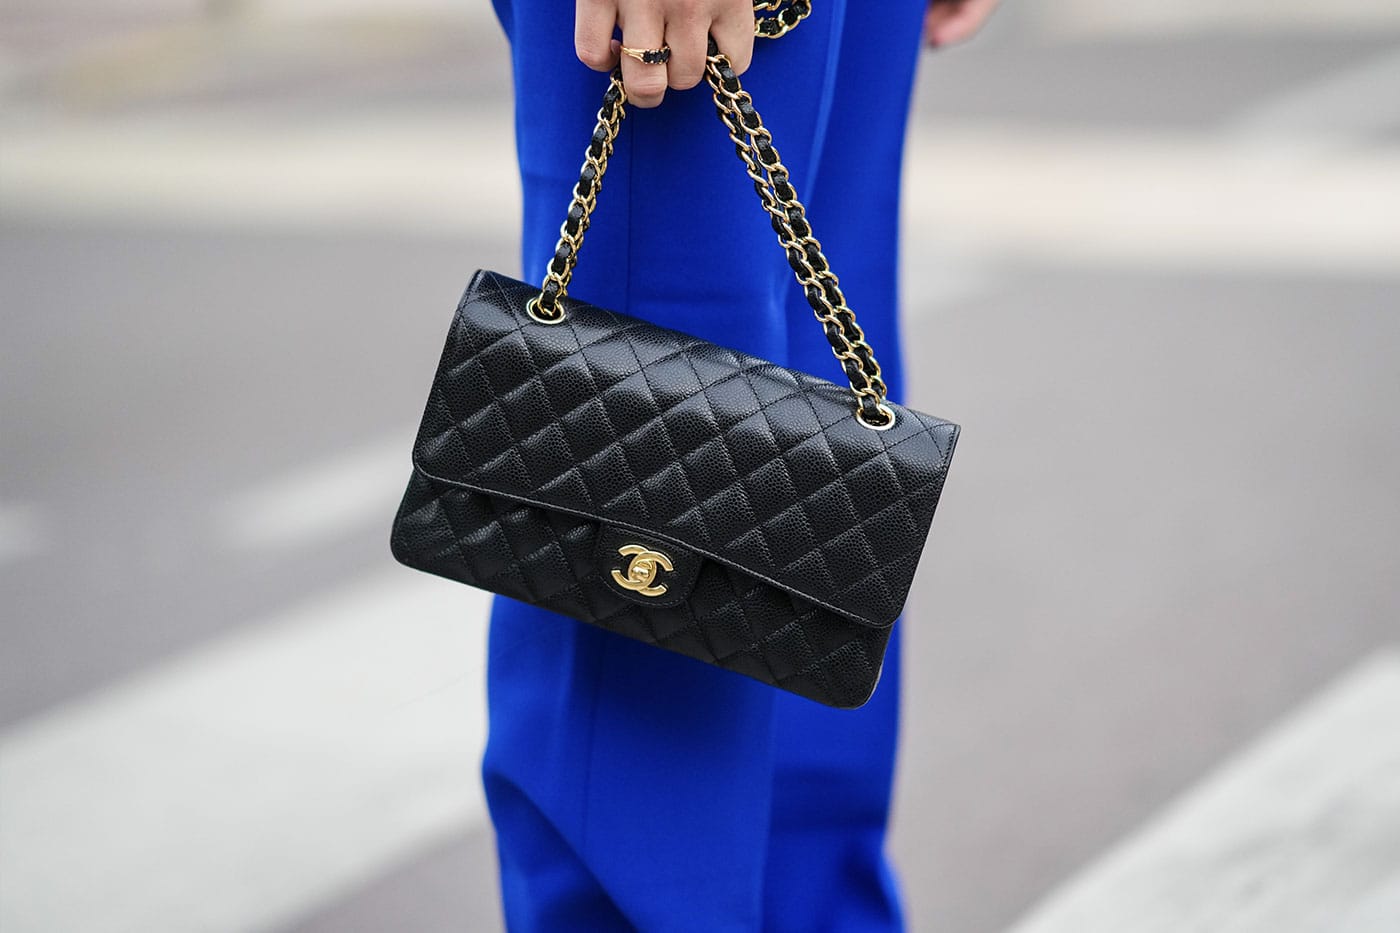 The Look for Less: Chanel Bag | Chronicles of Frivolity